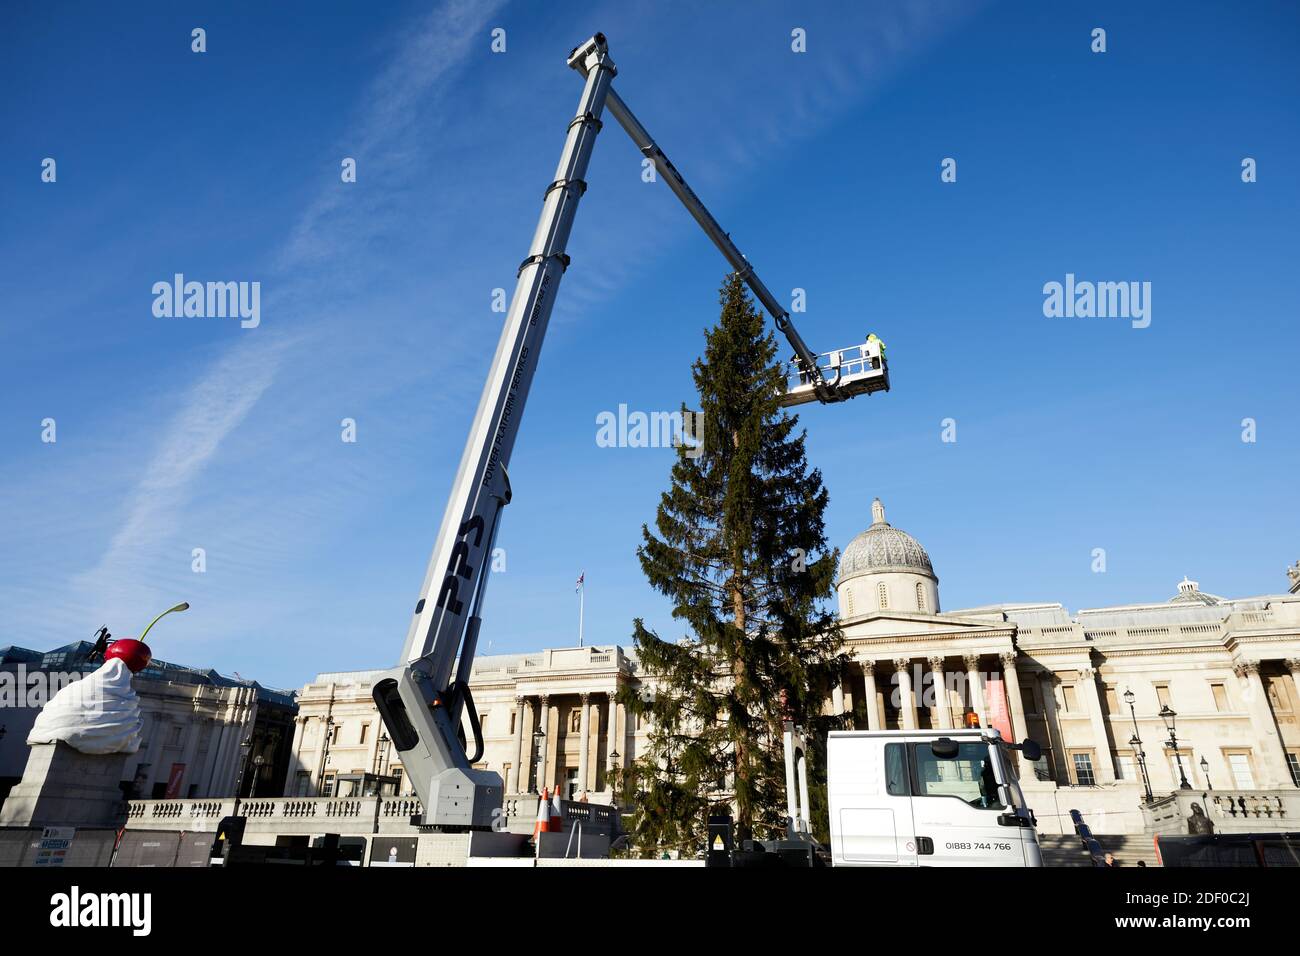 London, UK. - 01 Dec 2020: The traditional Trafalgar Square Christmas tree being decorated in strong winter sunshine. Stock Photo